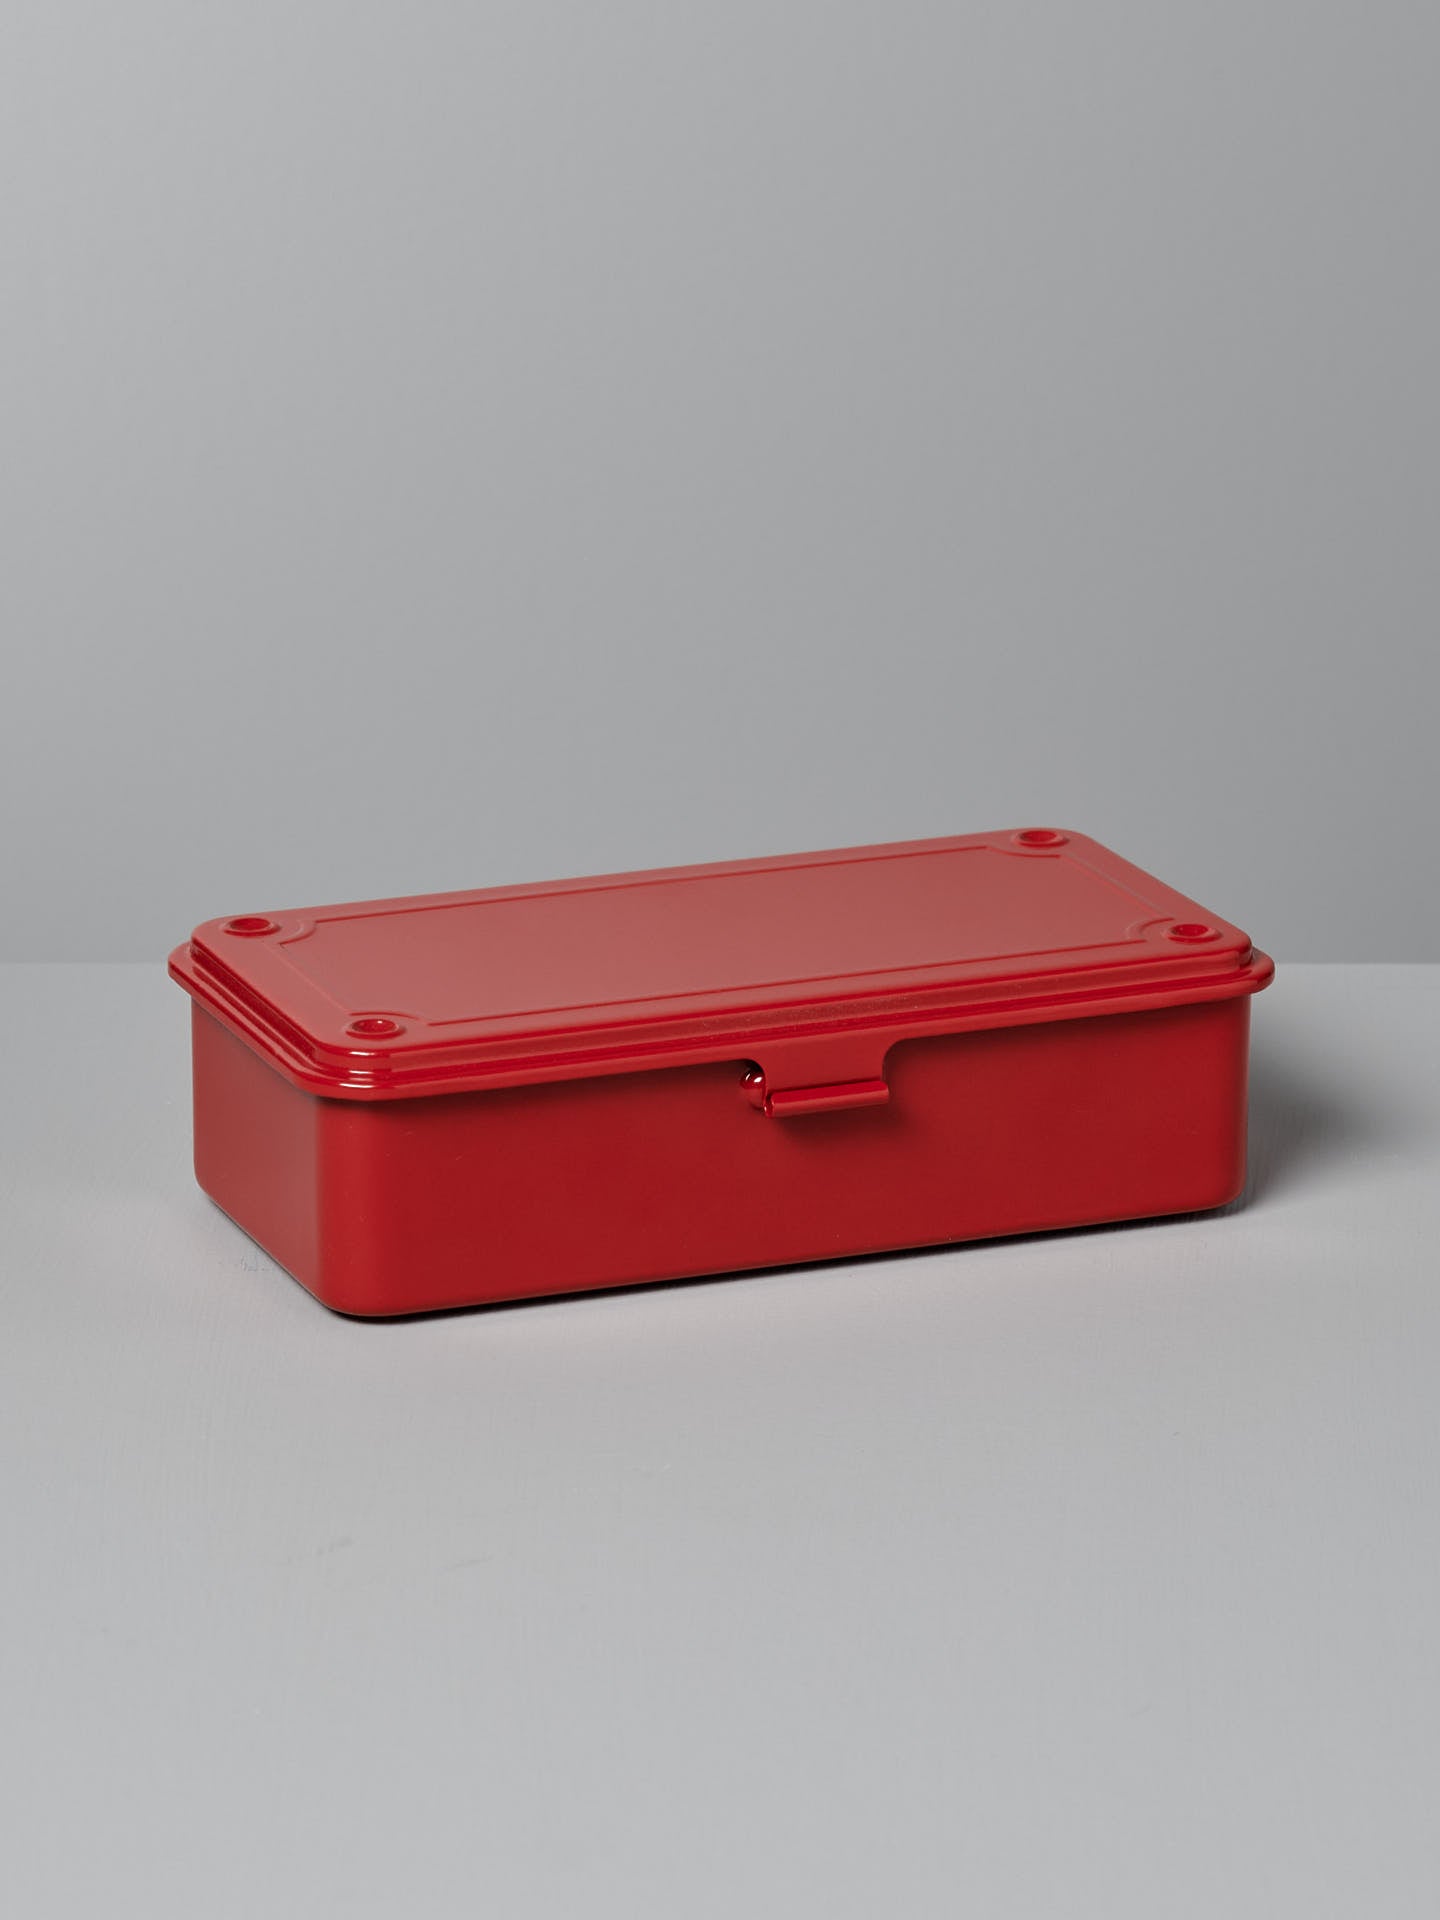 A rectangular, matte red Mini Steel Toolbox T-190 – Red by TOYO STEEL with a snap closure, resting on a gray surface against a light gray background, designed to complement any powder-coated steel aesthetic.